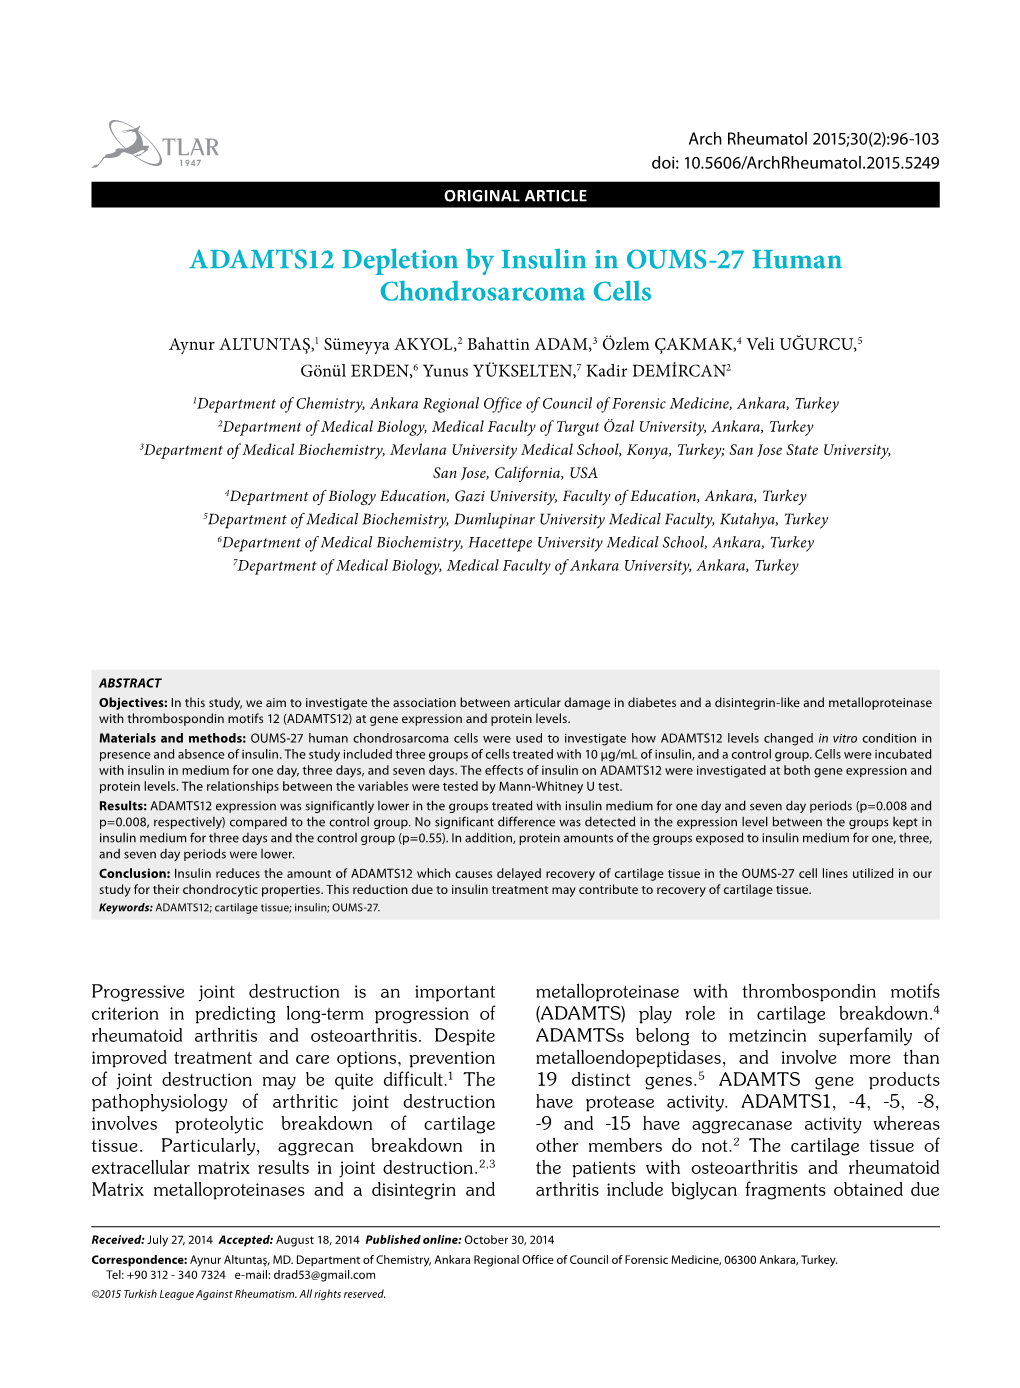 ADAMTS12 Depletion by Insulin in OUMS-27 Human Chondrosarcoma Cells